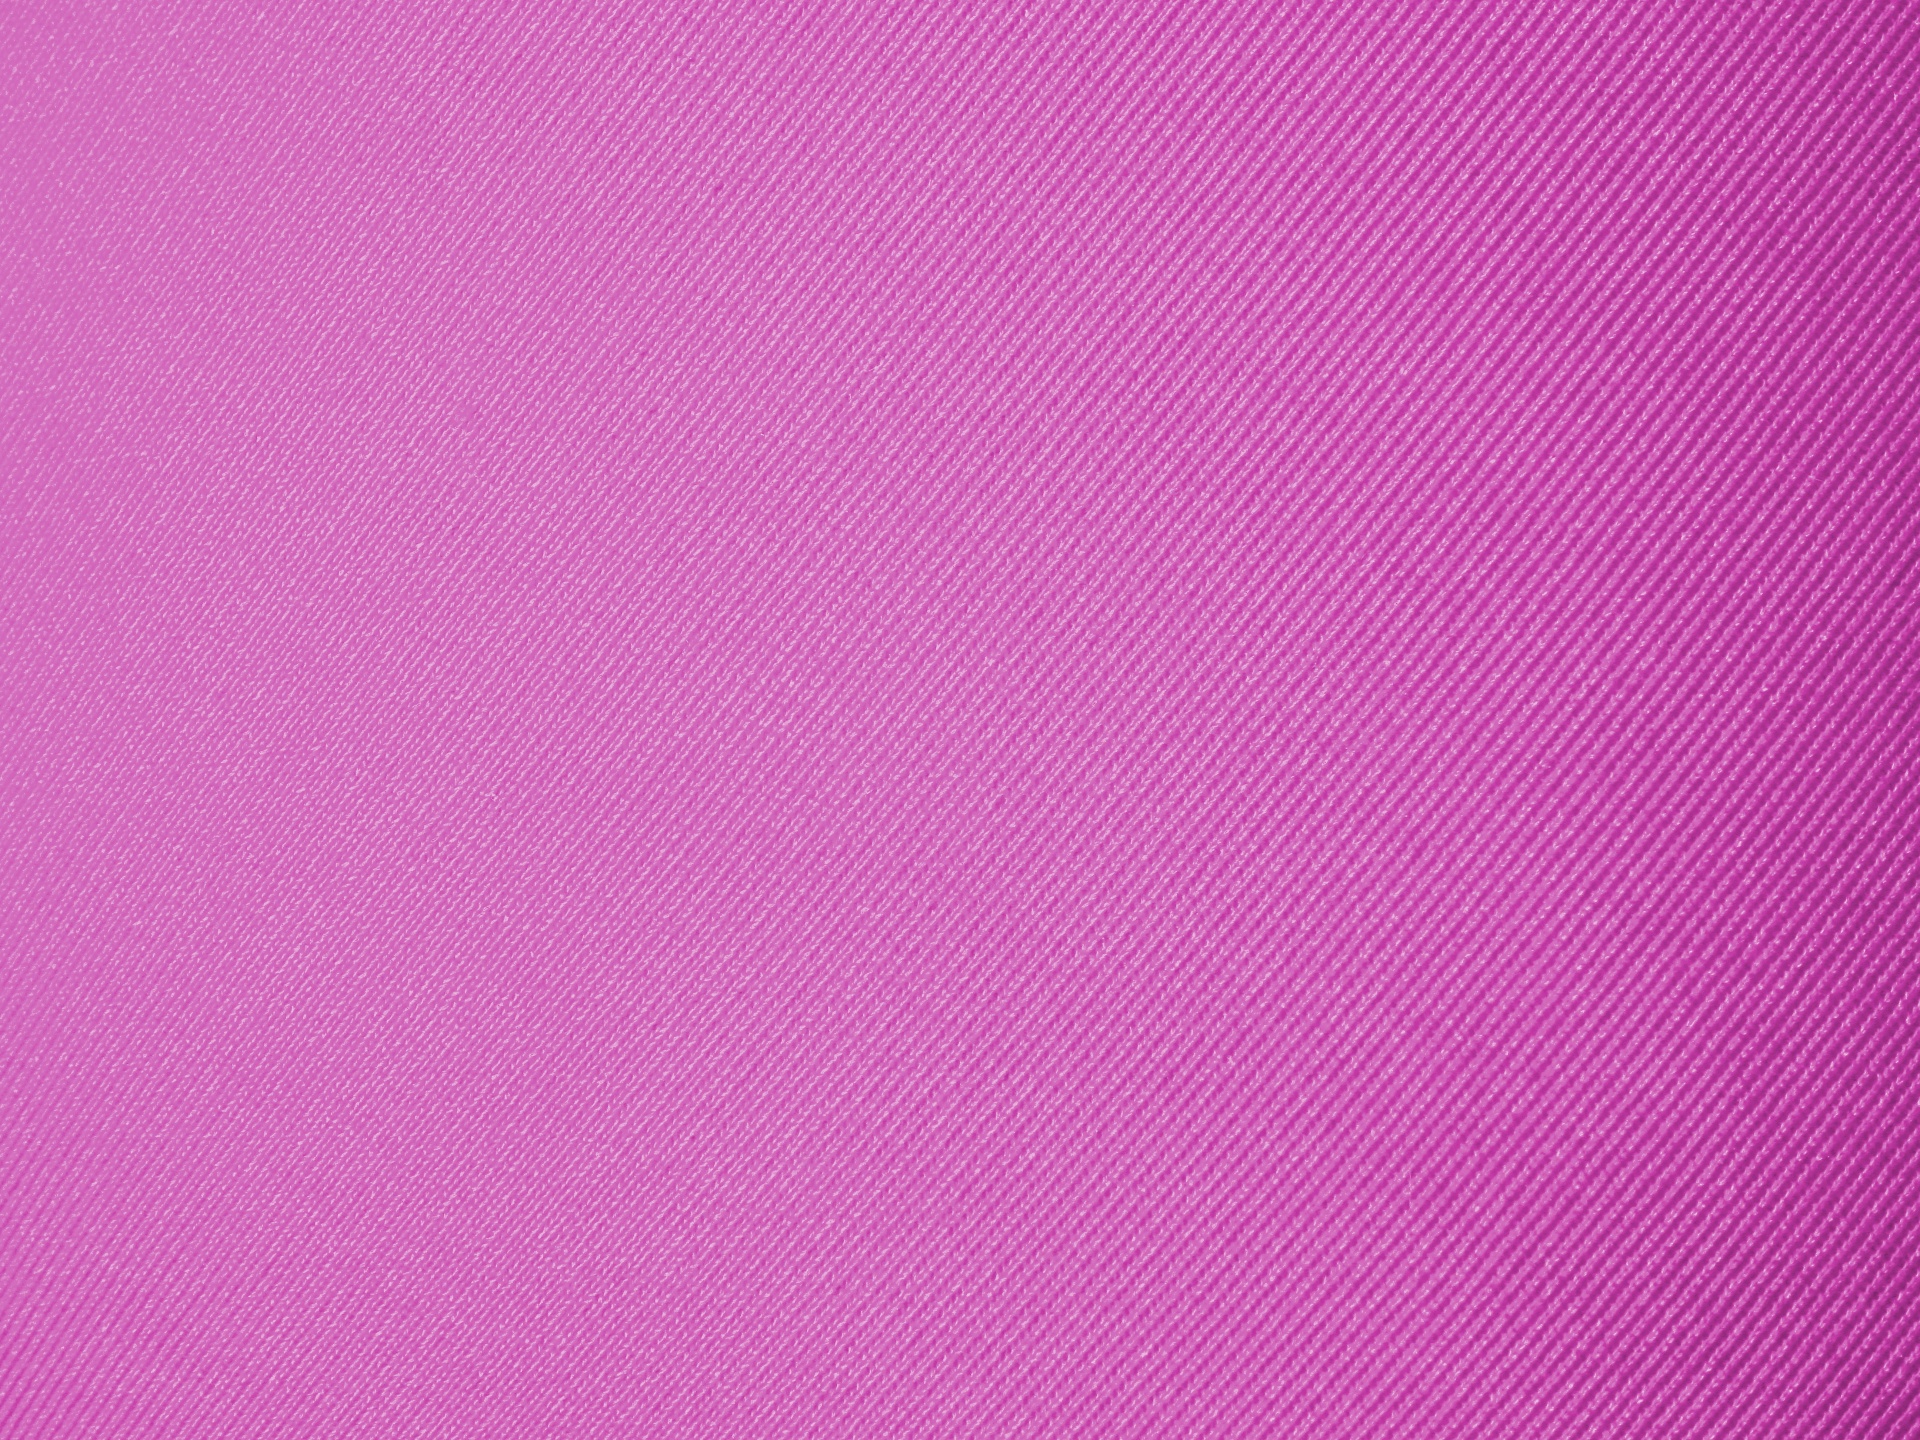 lilac pink backgrounds free photo